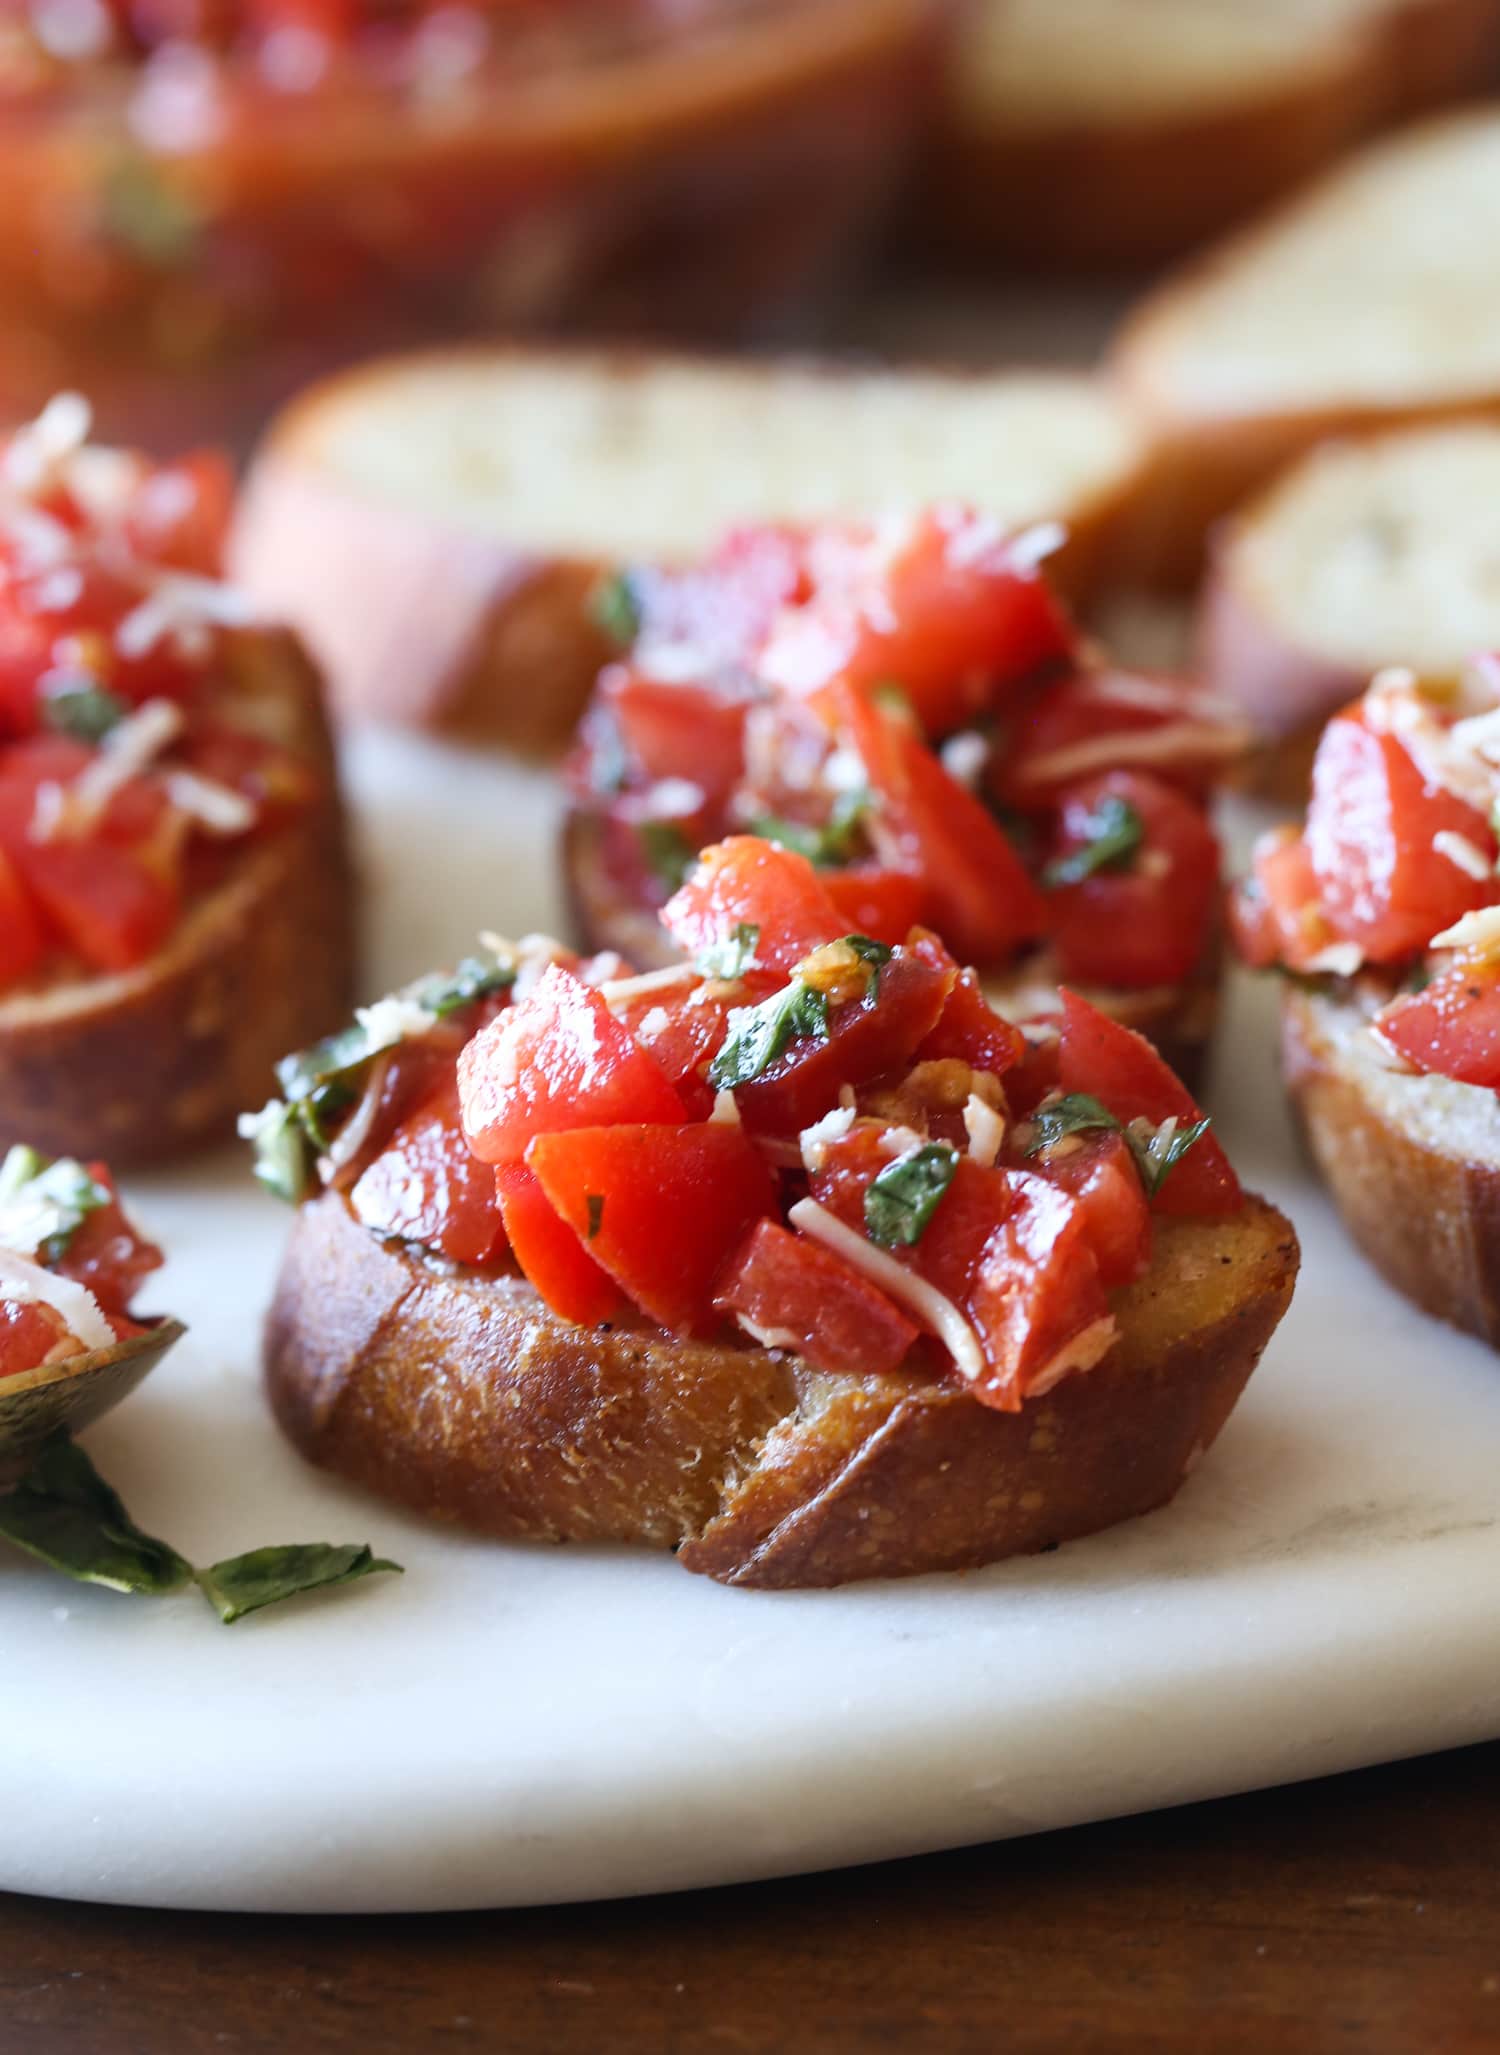 Slices of toasted bread topped with bruschetta.